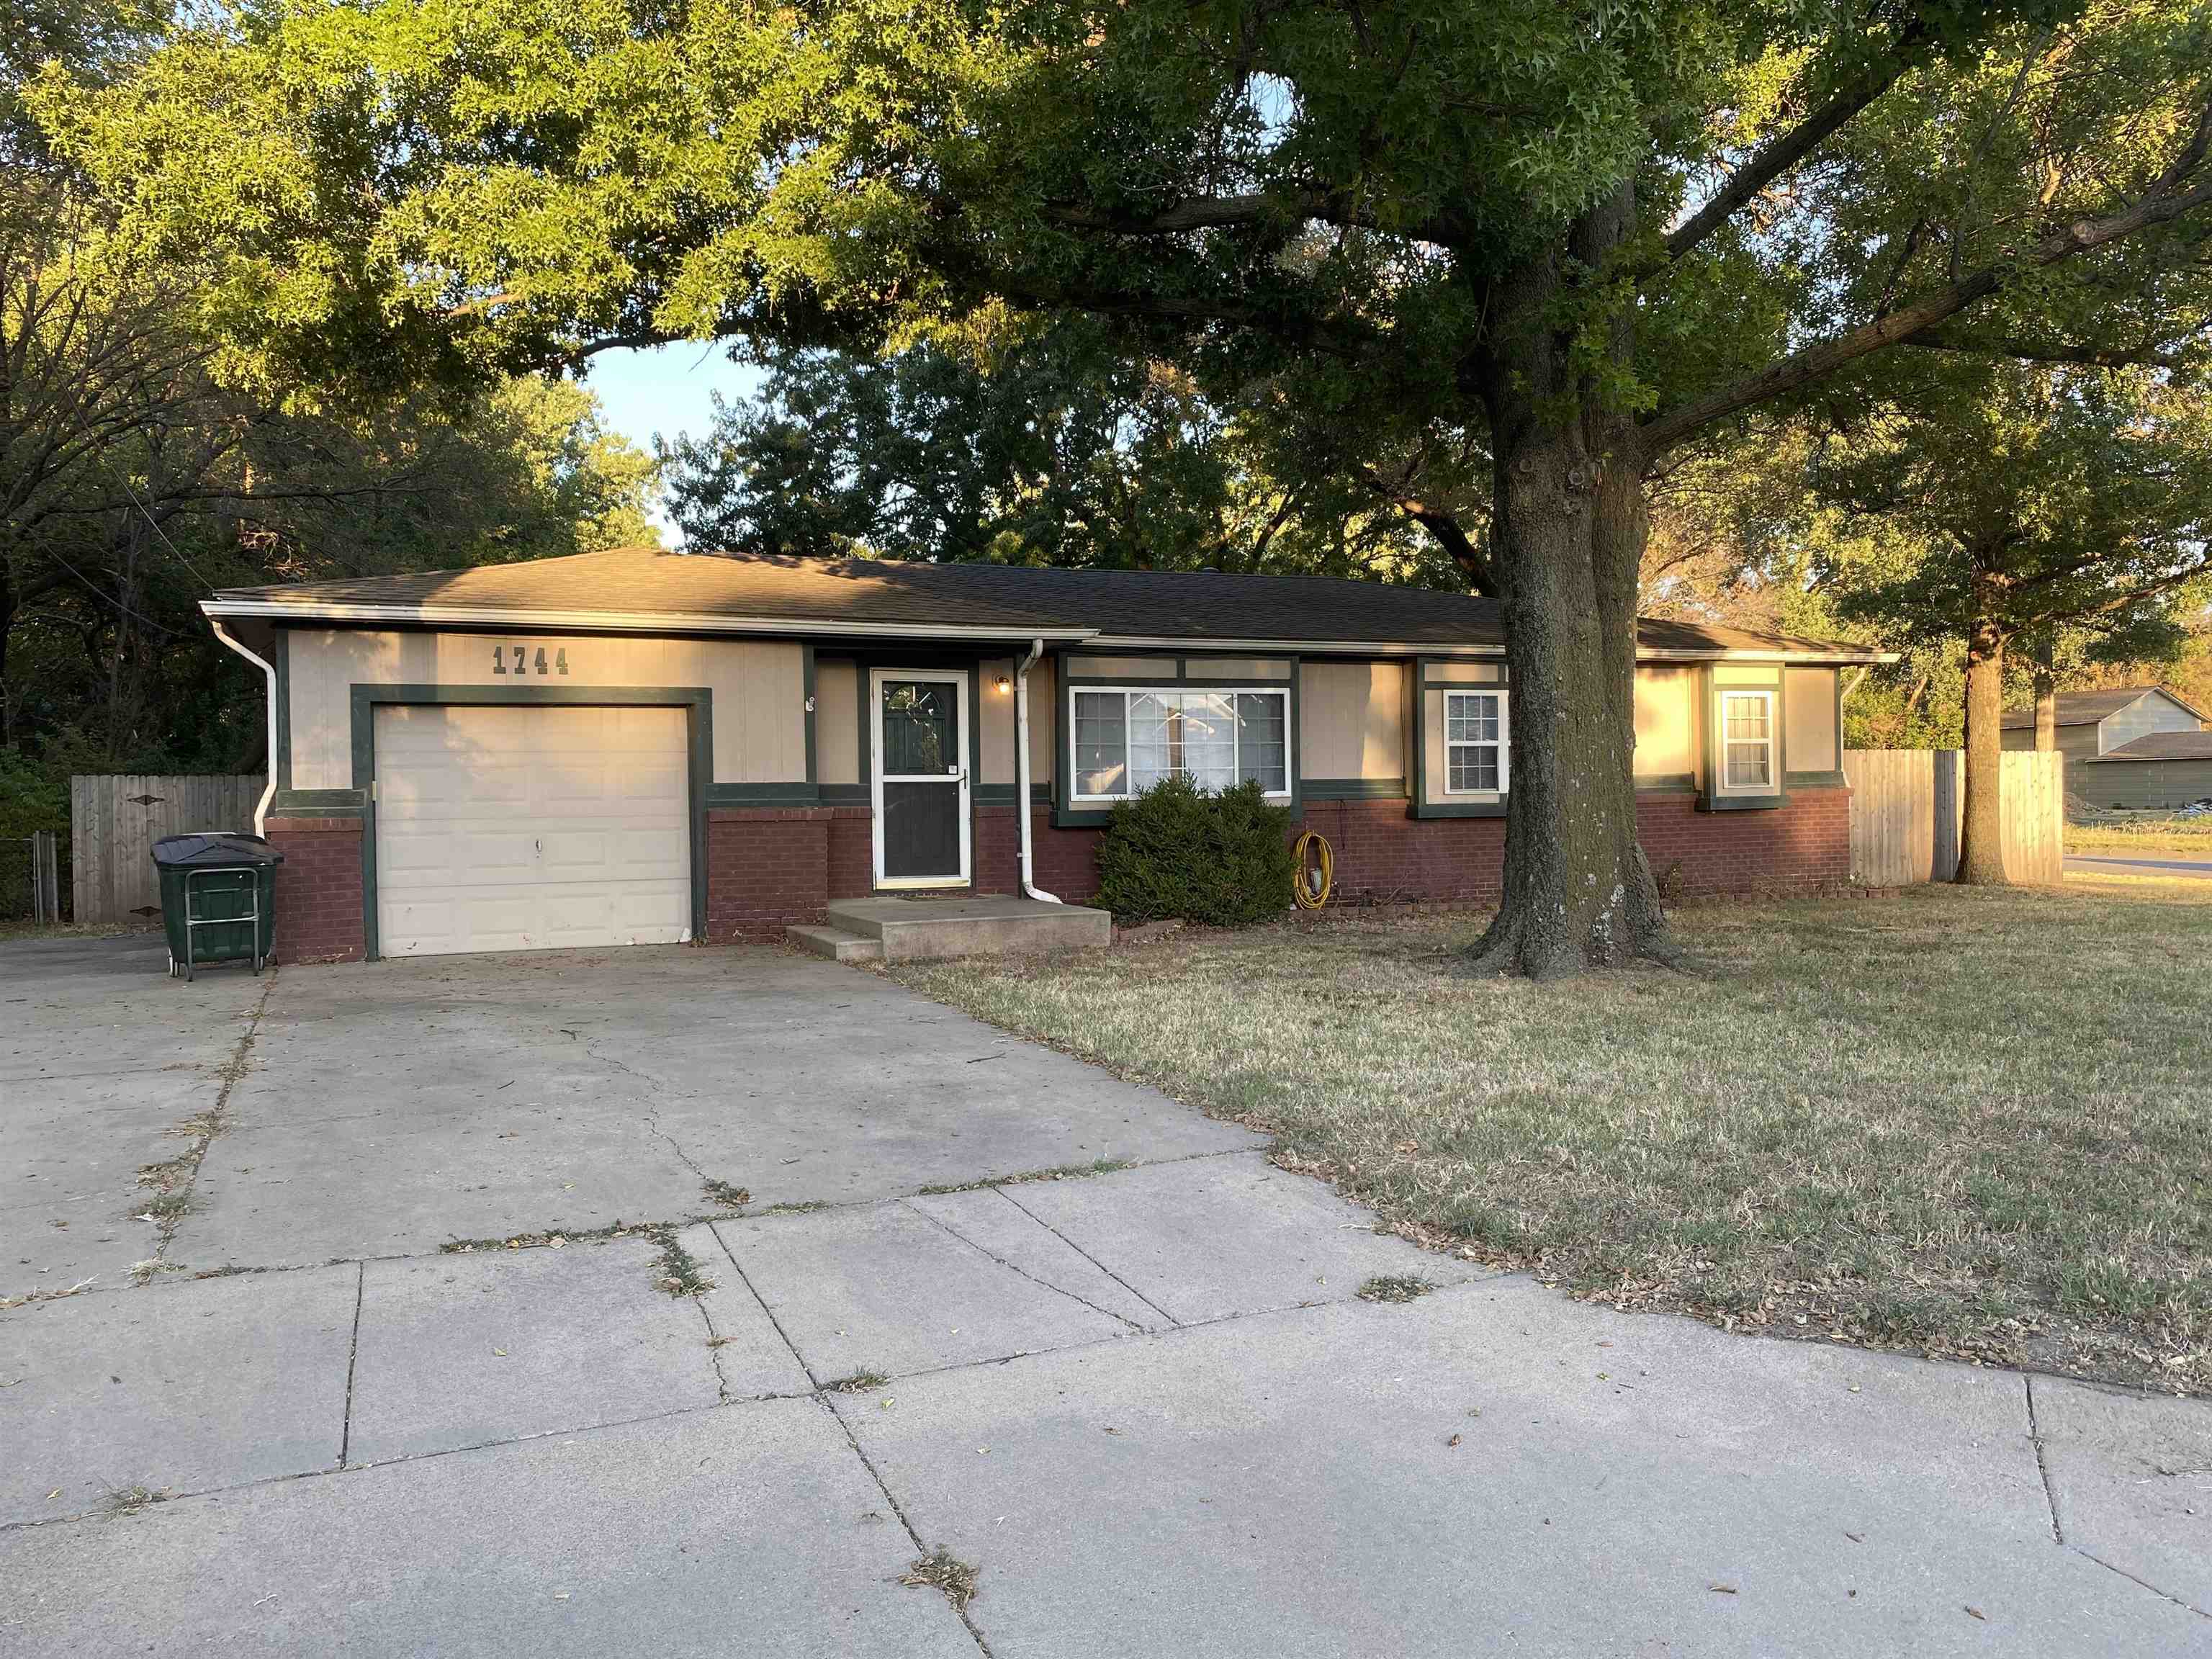 Charming 3 bedroom 1.5 bath in Goddard school district. Open kitchen and dining area, nice sized bed